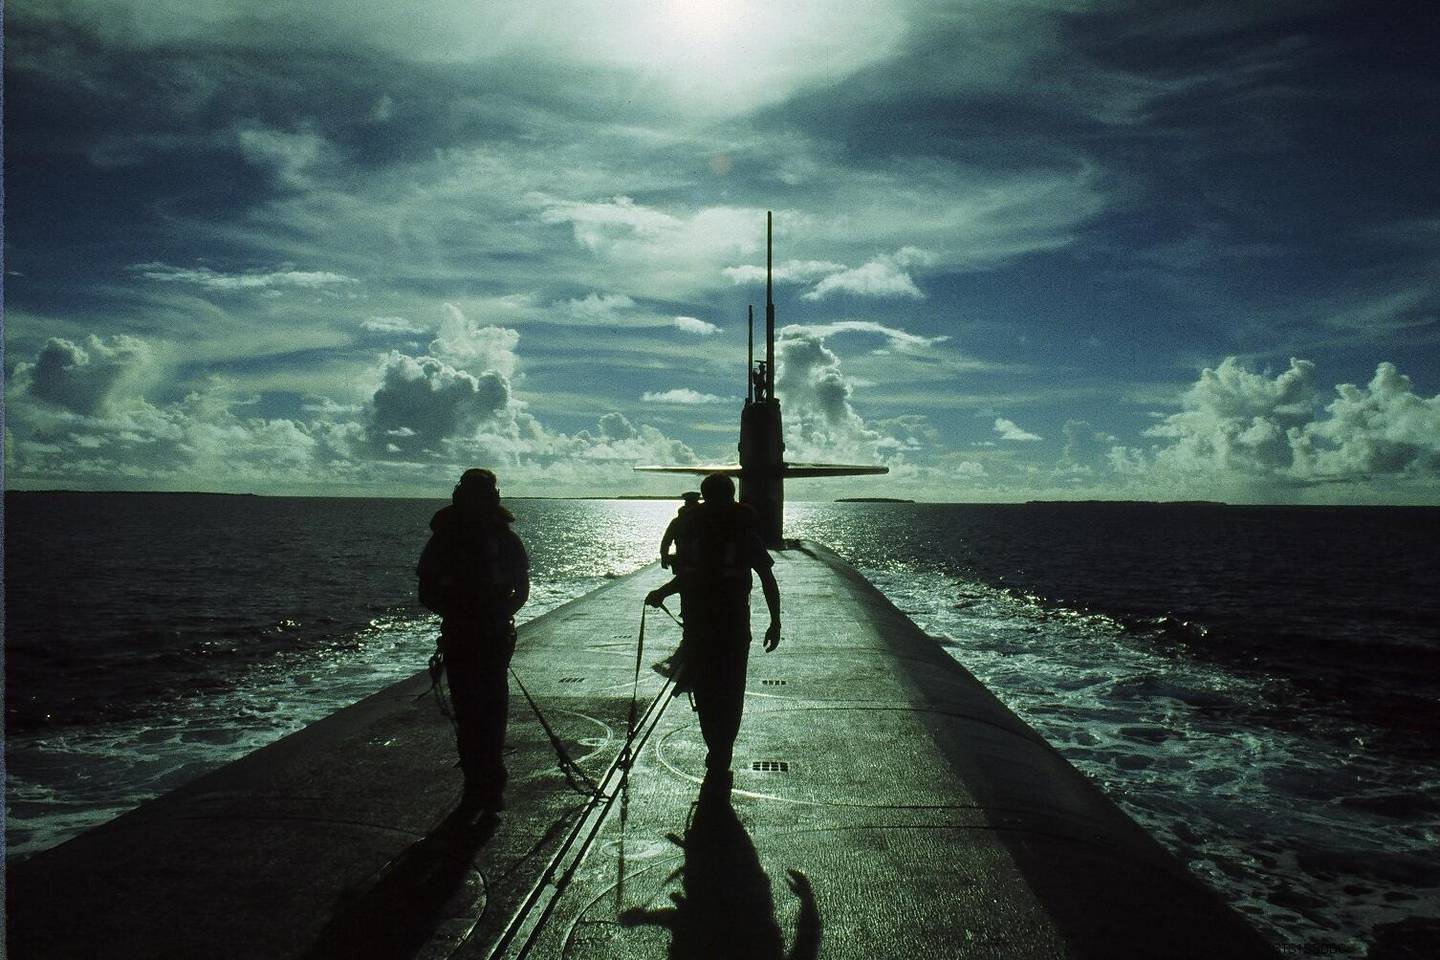 Sunrise over the Marshall Islands. Bill Kammer, left, and Stan Jankowski in the background.